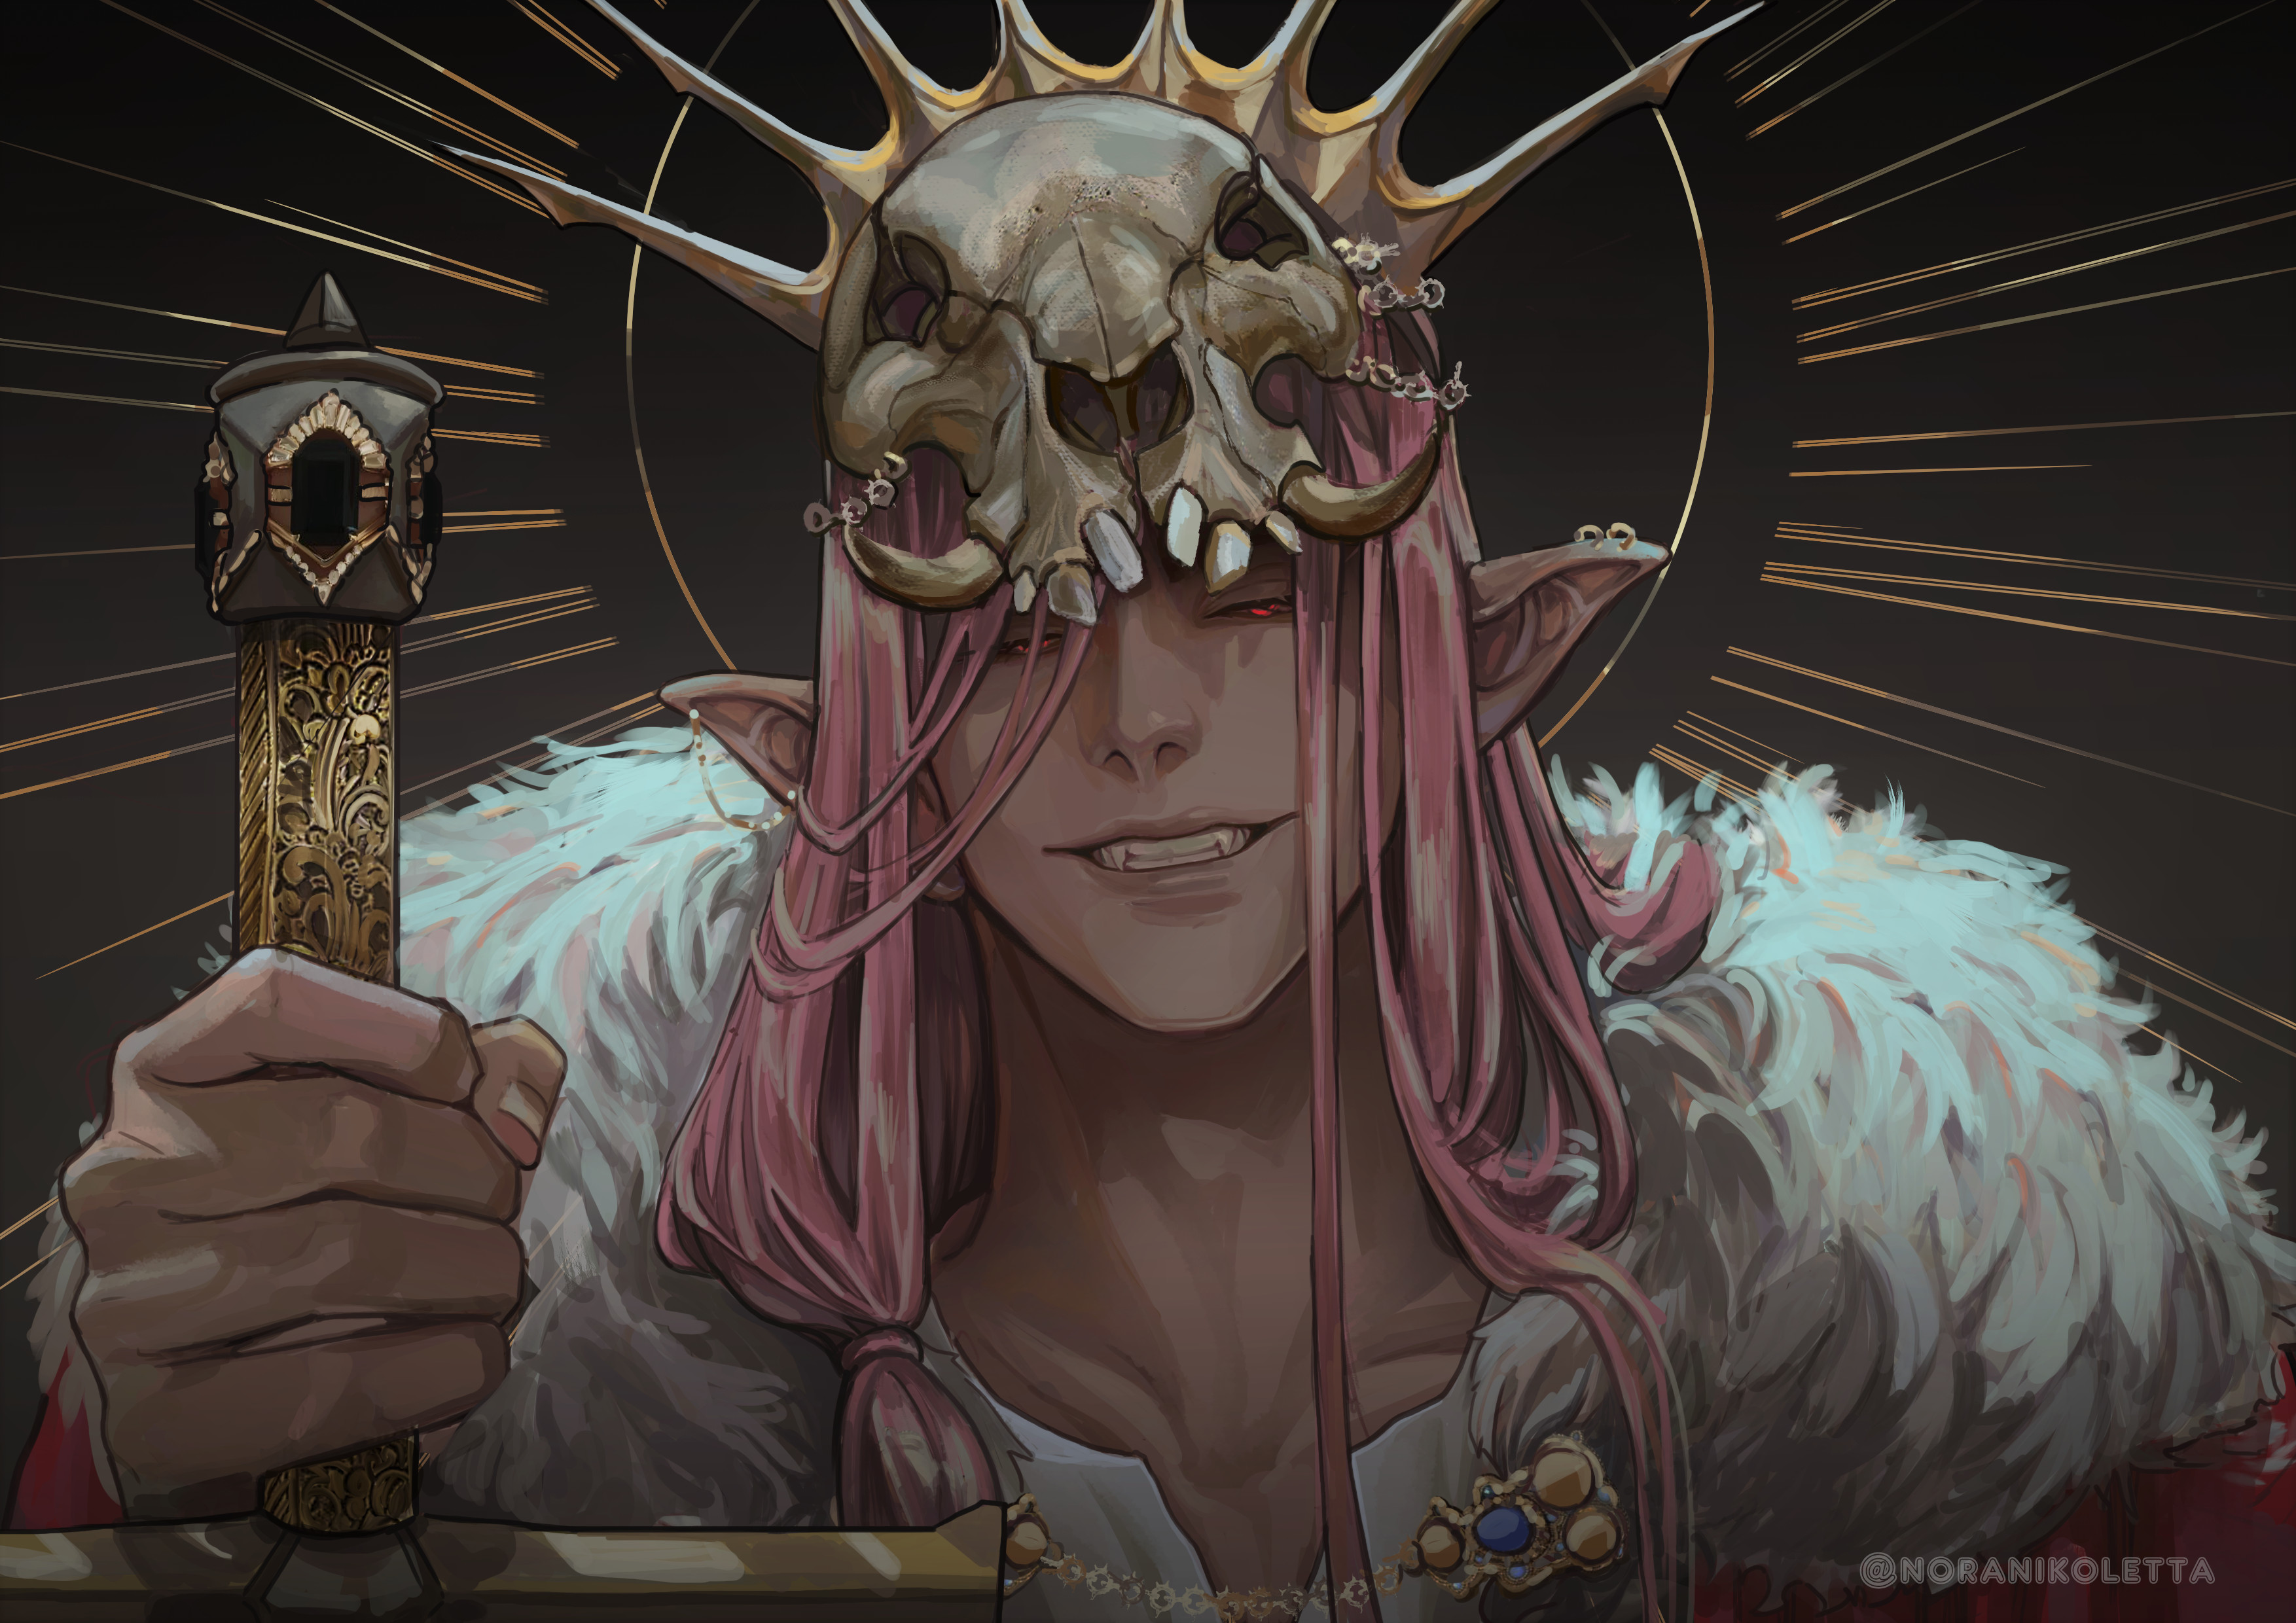 This is a drawing of Techno if he were an anime character. He is more human-like in this drawing, but he does have fantastical elements to his face. He has long pink hair and a boar's skull on his head, nestled underneath his simple golden diadem. White fur covers his broad shoulders, and he holds the holster to a legendary sword. Around his head is a Catholic/Christian halo, showing off how godly he truly is.